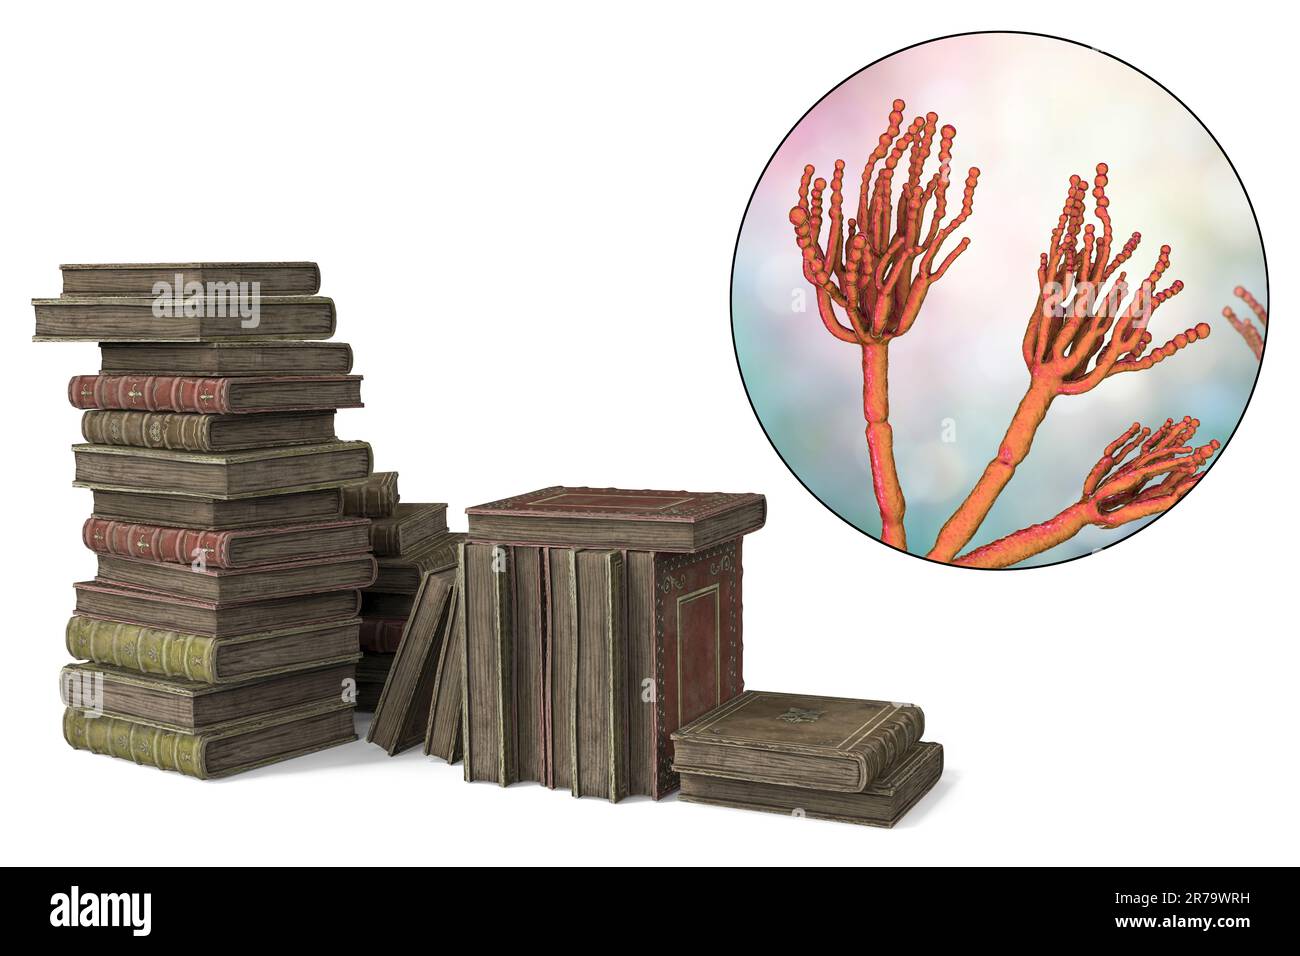 Mold in old books, conceptual 3D illustration. Antique books and close-up view of mold fungi Penicillium, the most common microscopic fungus found in Stock Photo